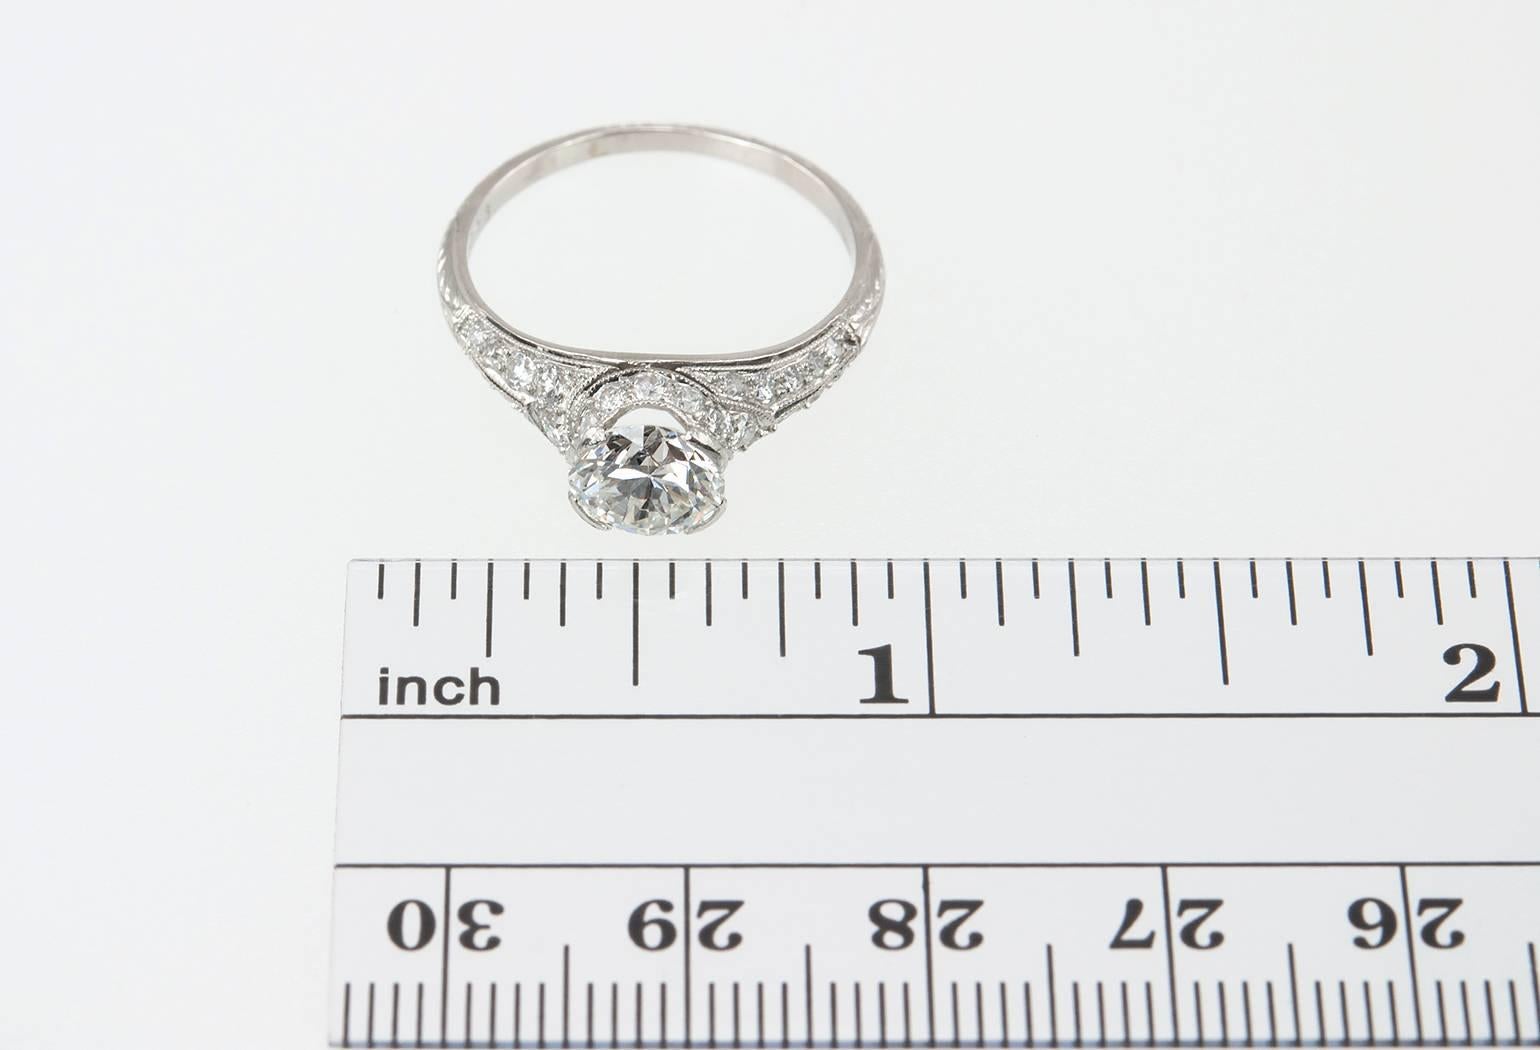 A stunning Edwardian engagement ring! This ring features an Old European Cut 1.20 carat diamond that is F in color and VS1 in clarity (per GIA certificate).  The ring is set with round diamonds throughout, which make the ring really sparkle! The